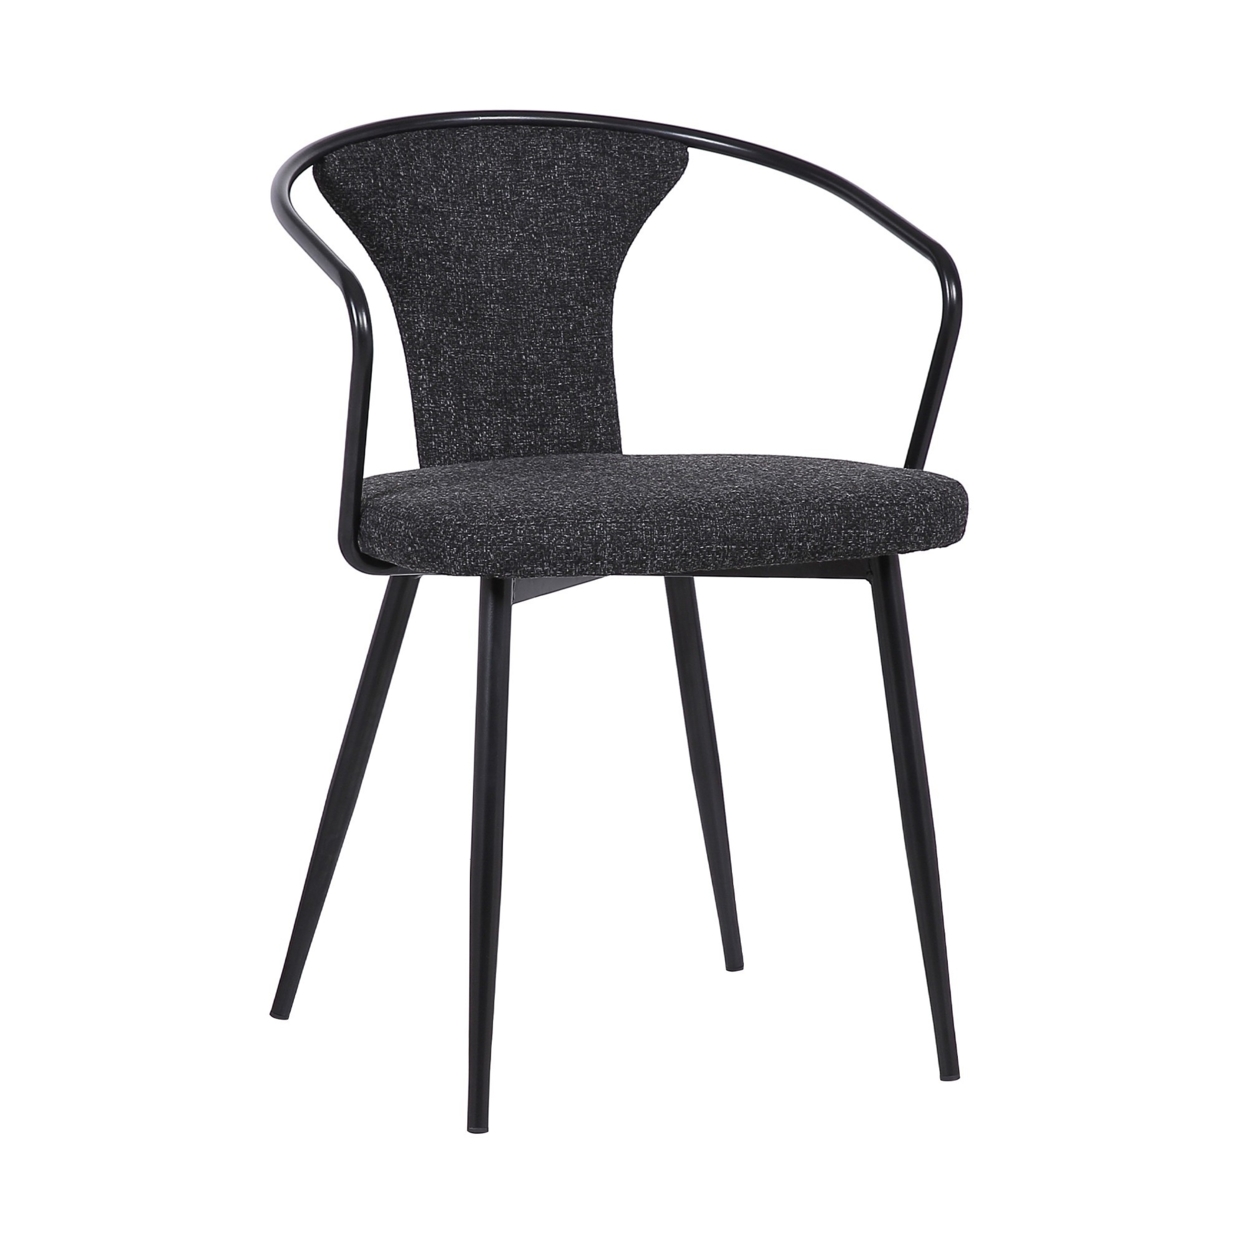 19 Inch Modern Fabric Dining Chair With Curved Back, Black- Saltoro Sherpi